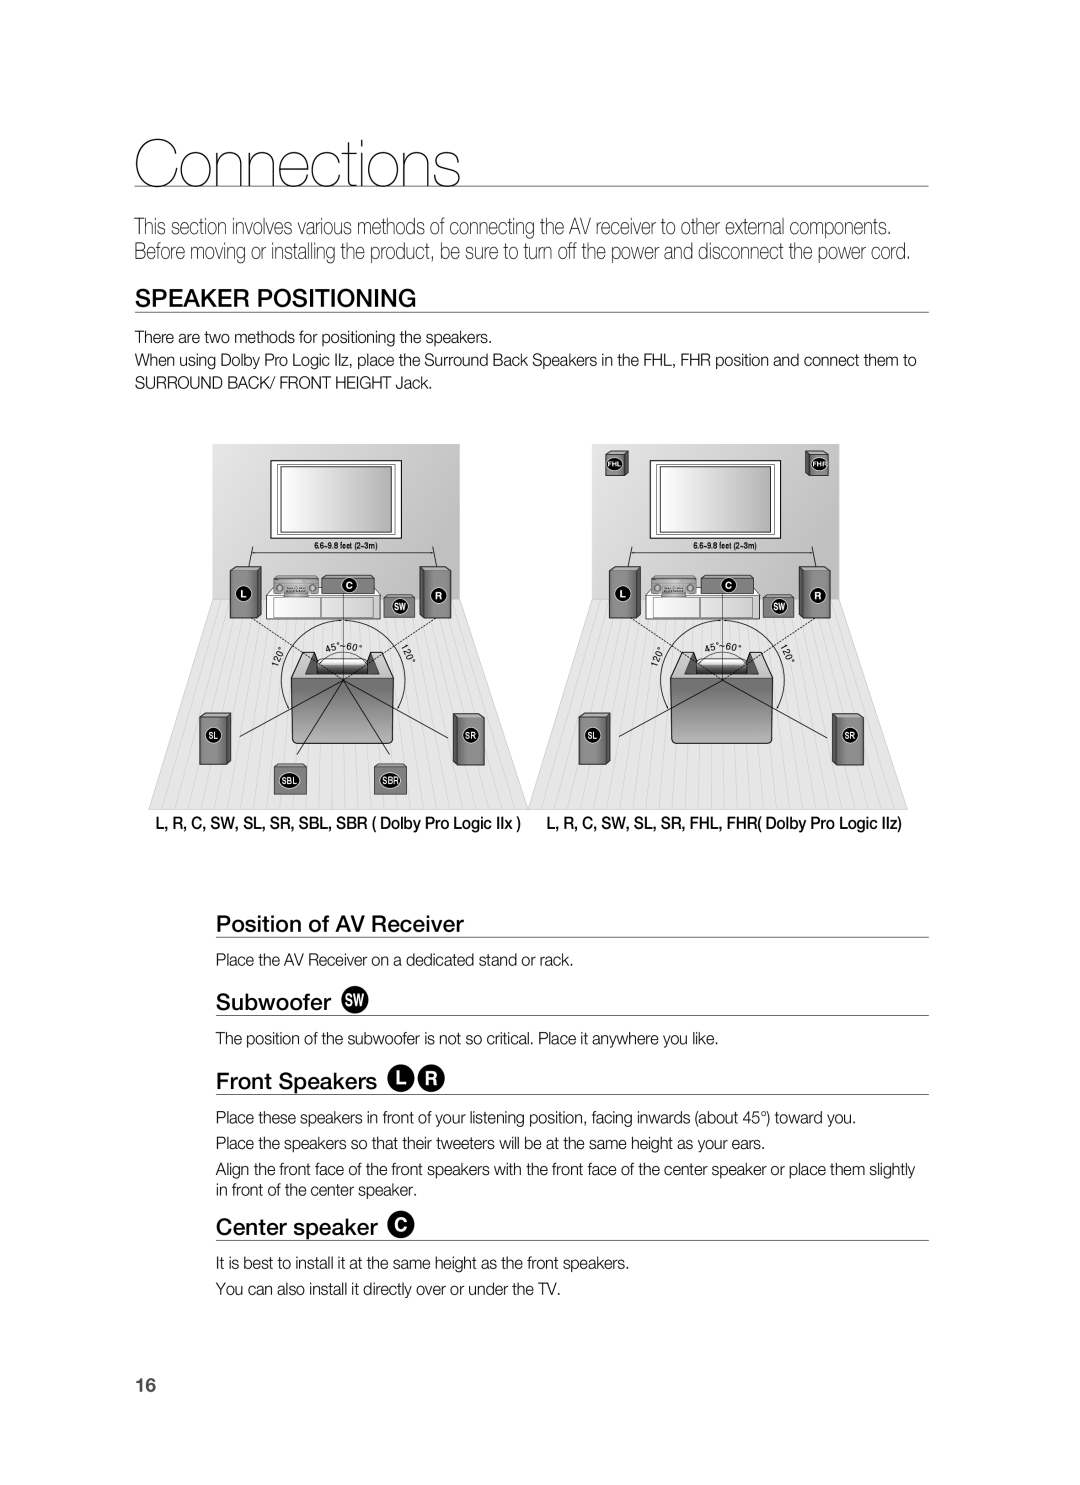 Samsung HW-C900-XAA user manual Connections, Speaker Positioning 